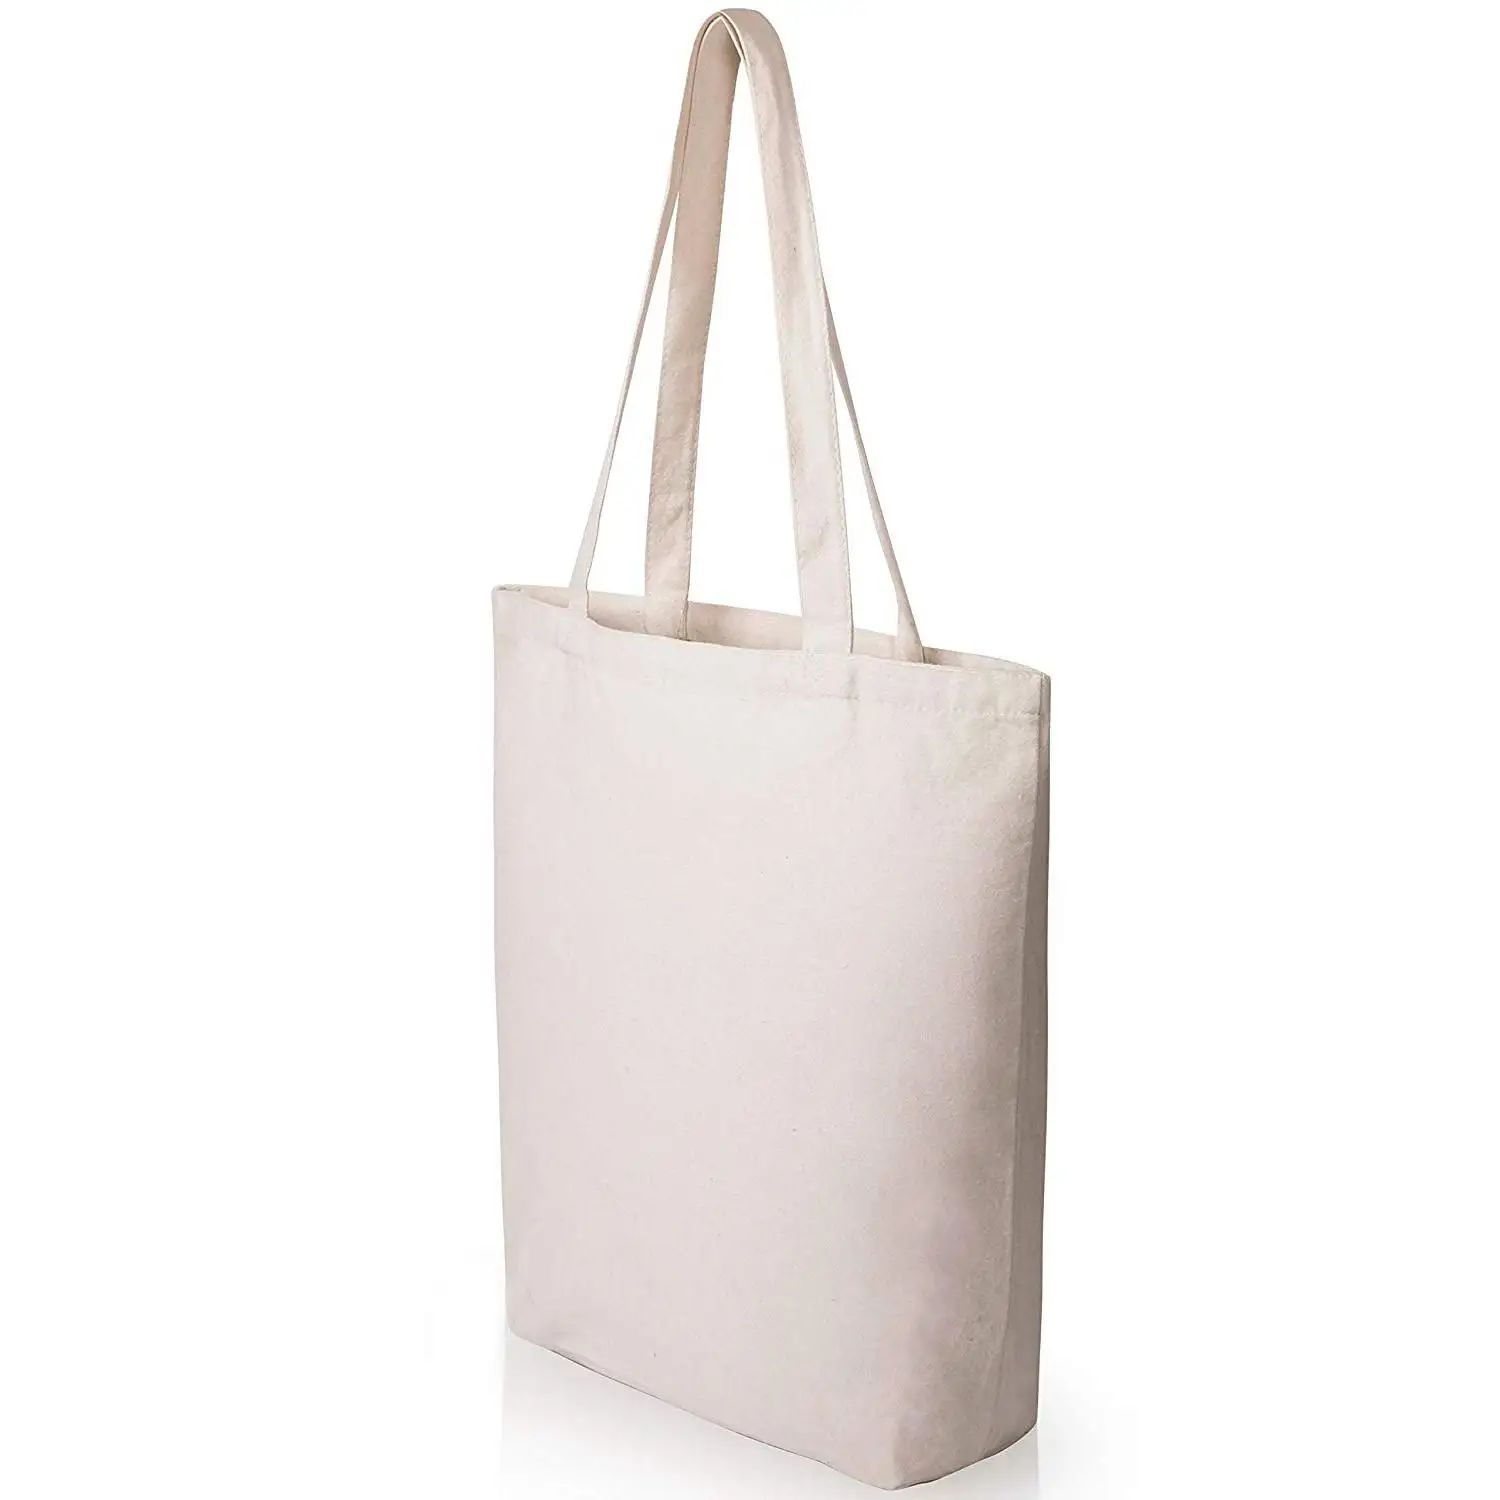 www.bagssaleusa.com : Buy Heavy Duty and Strong Large Natural Canvas Tote Bags with Bottom Gusset for ...